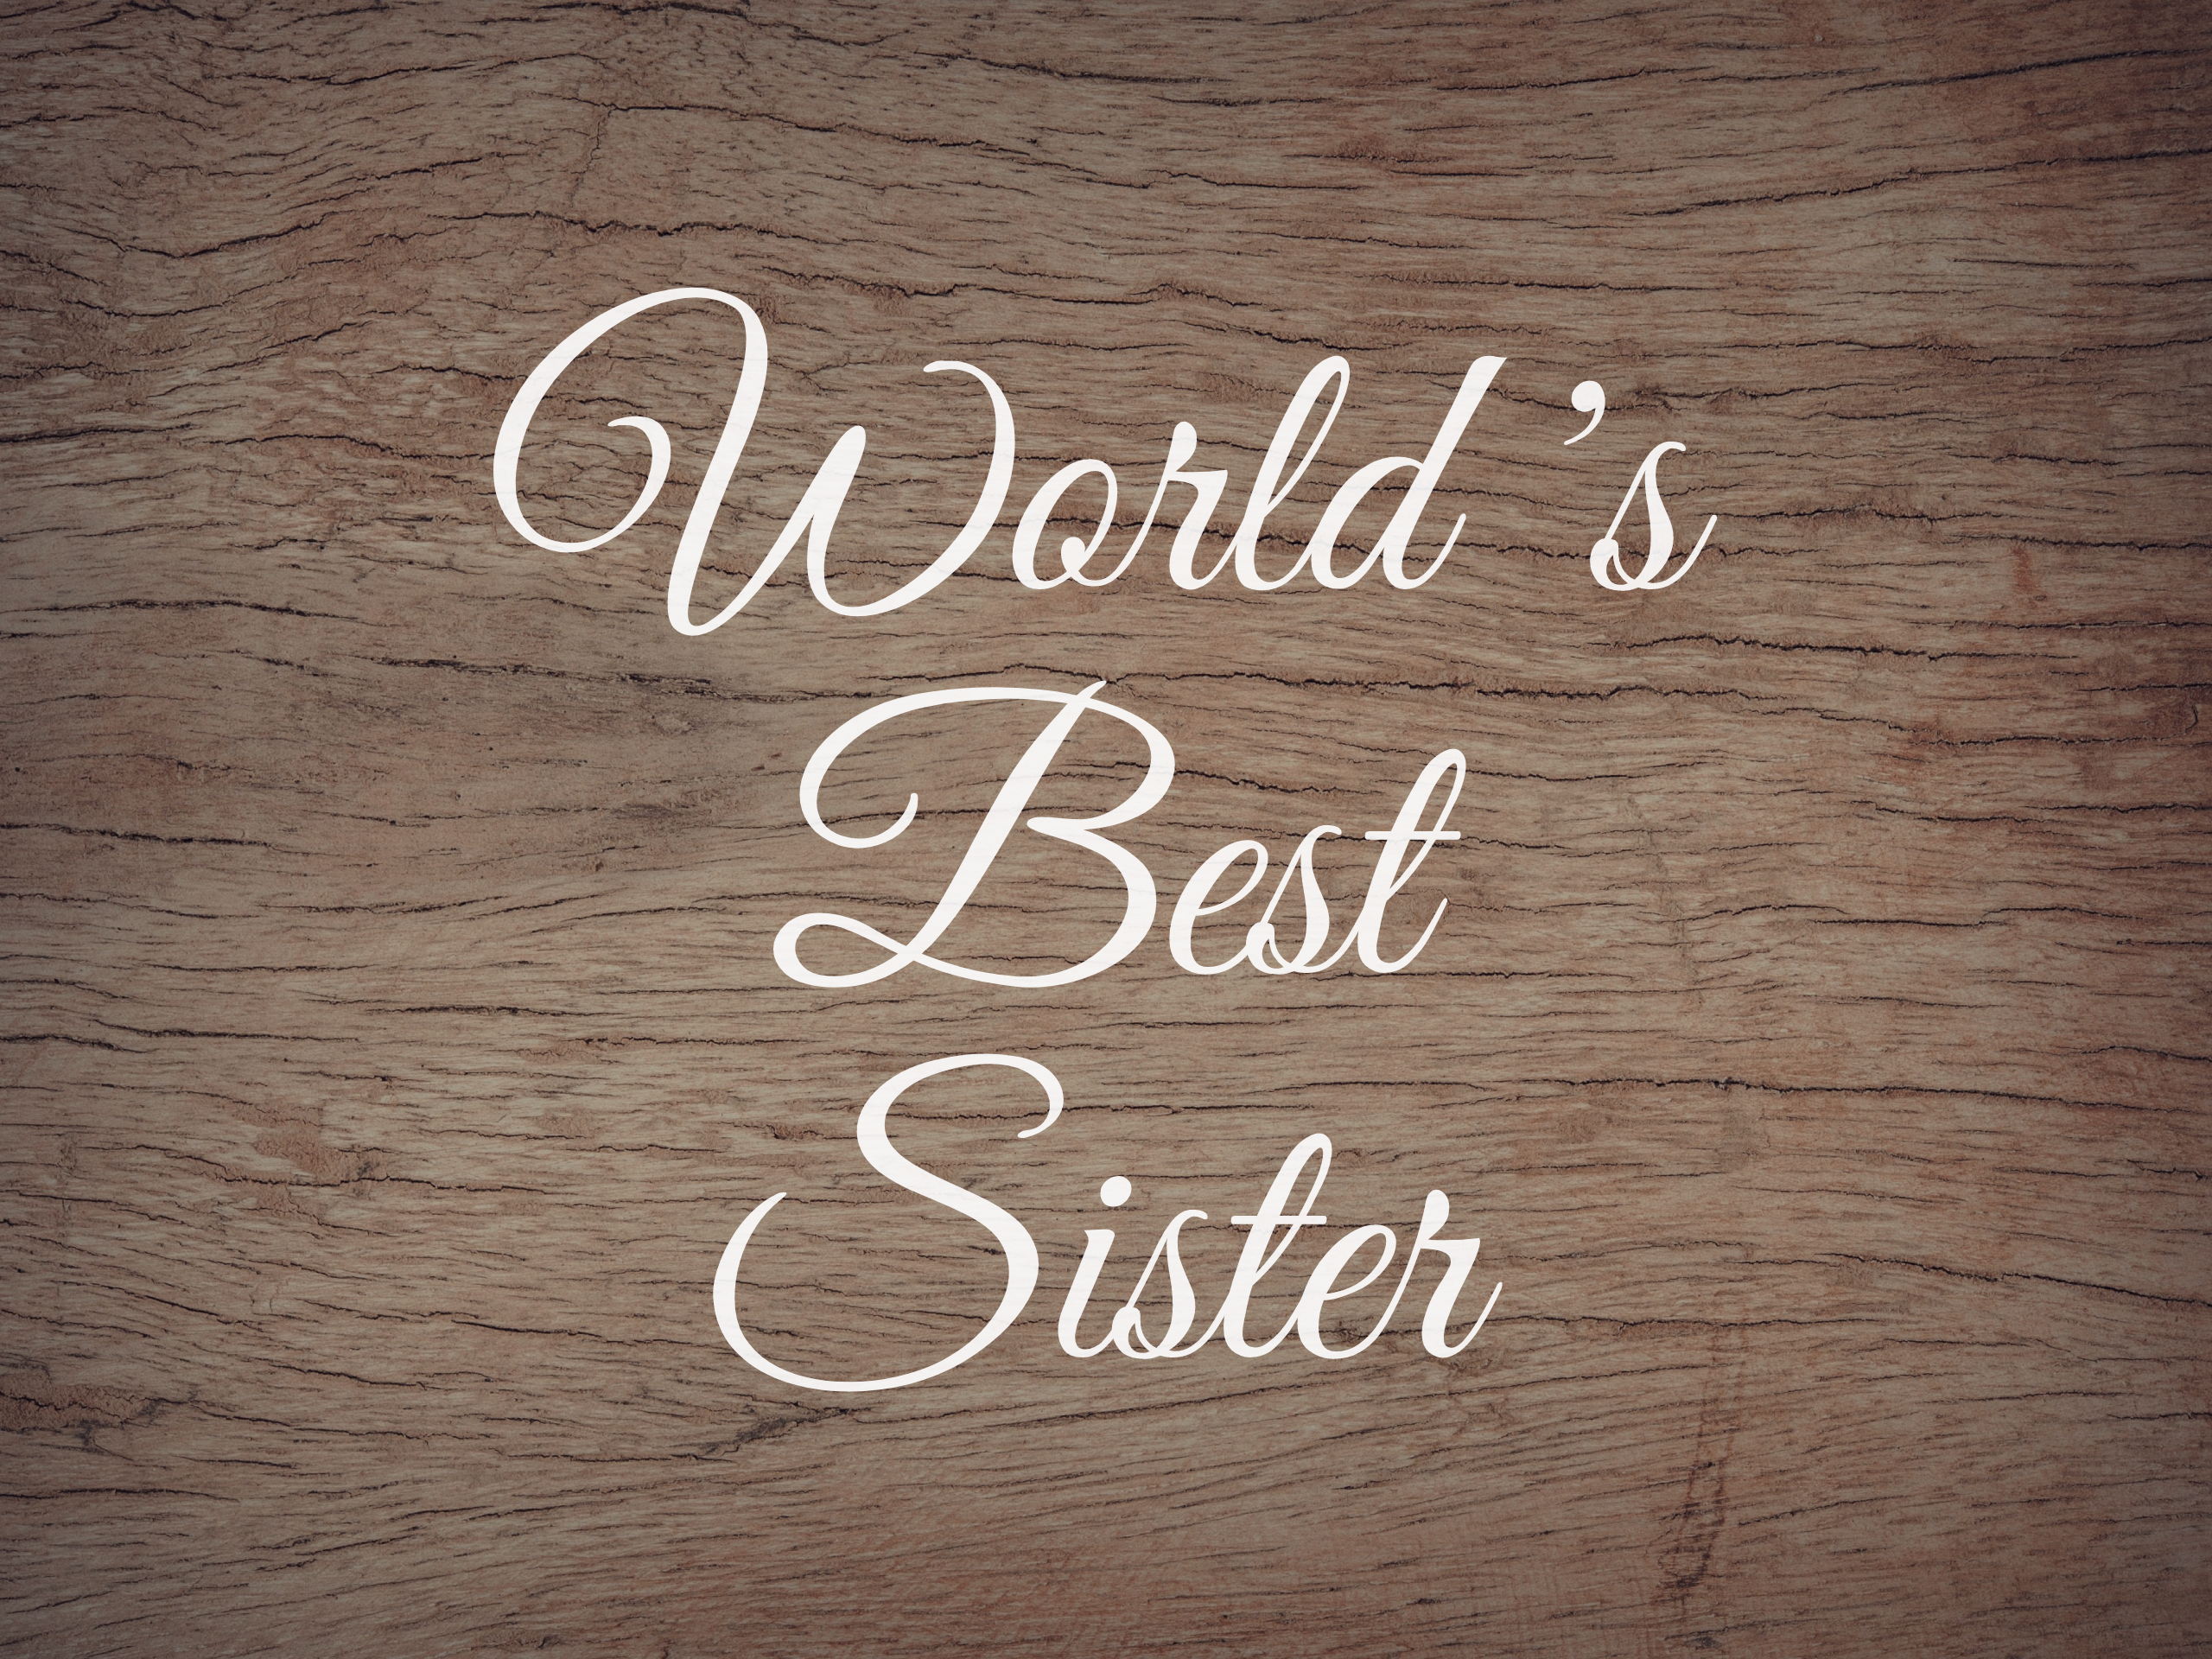 World's Best Sister Decal - Holiday Sister/Aunt/Mother/Mom Vinyl Decals for Home, Gifts, Businesses and More!